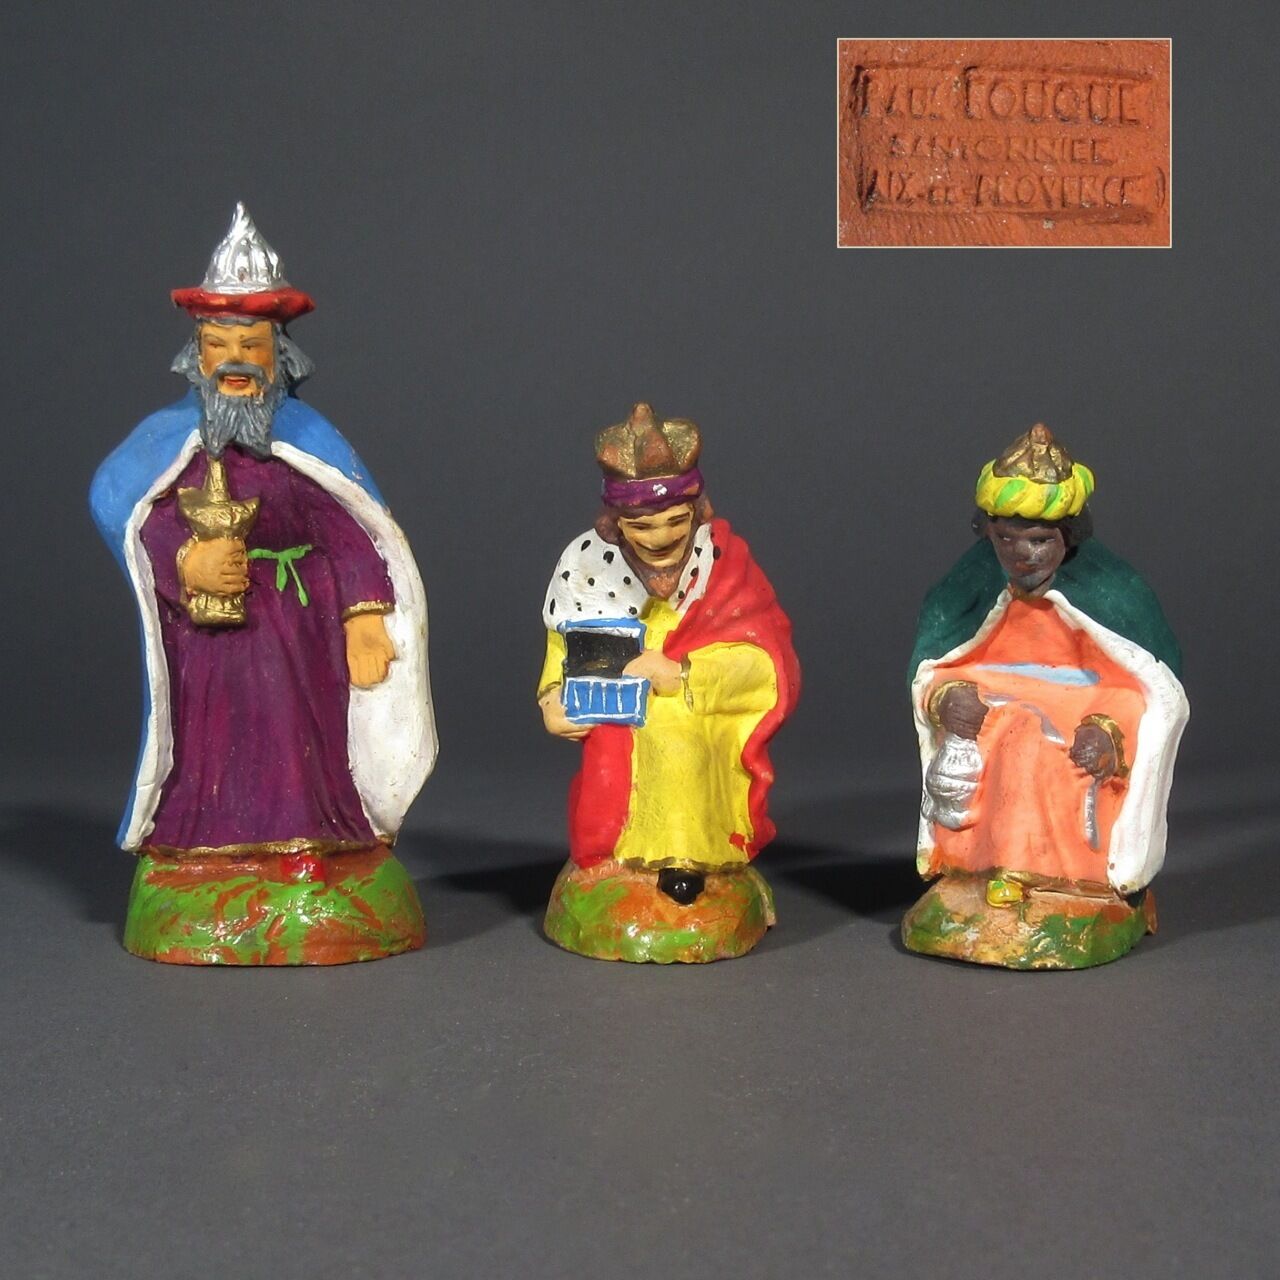 Vintage French Santons Figurines, Provence, Wise Men, Signed Fouque, Christmas